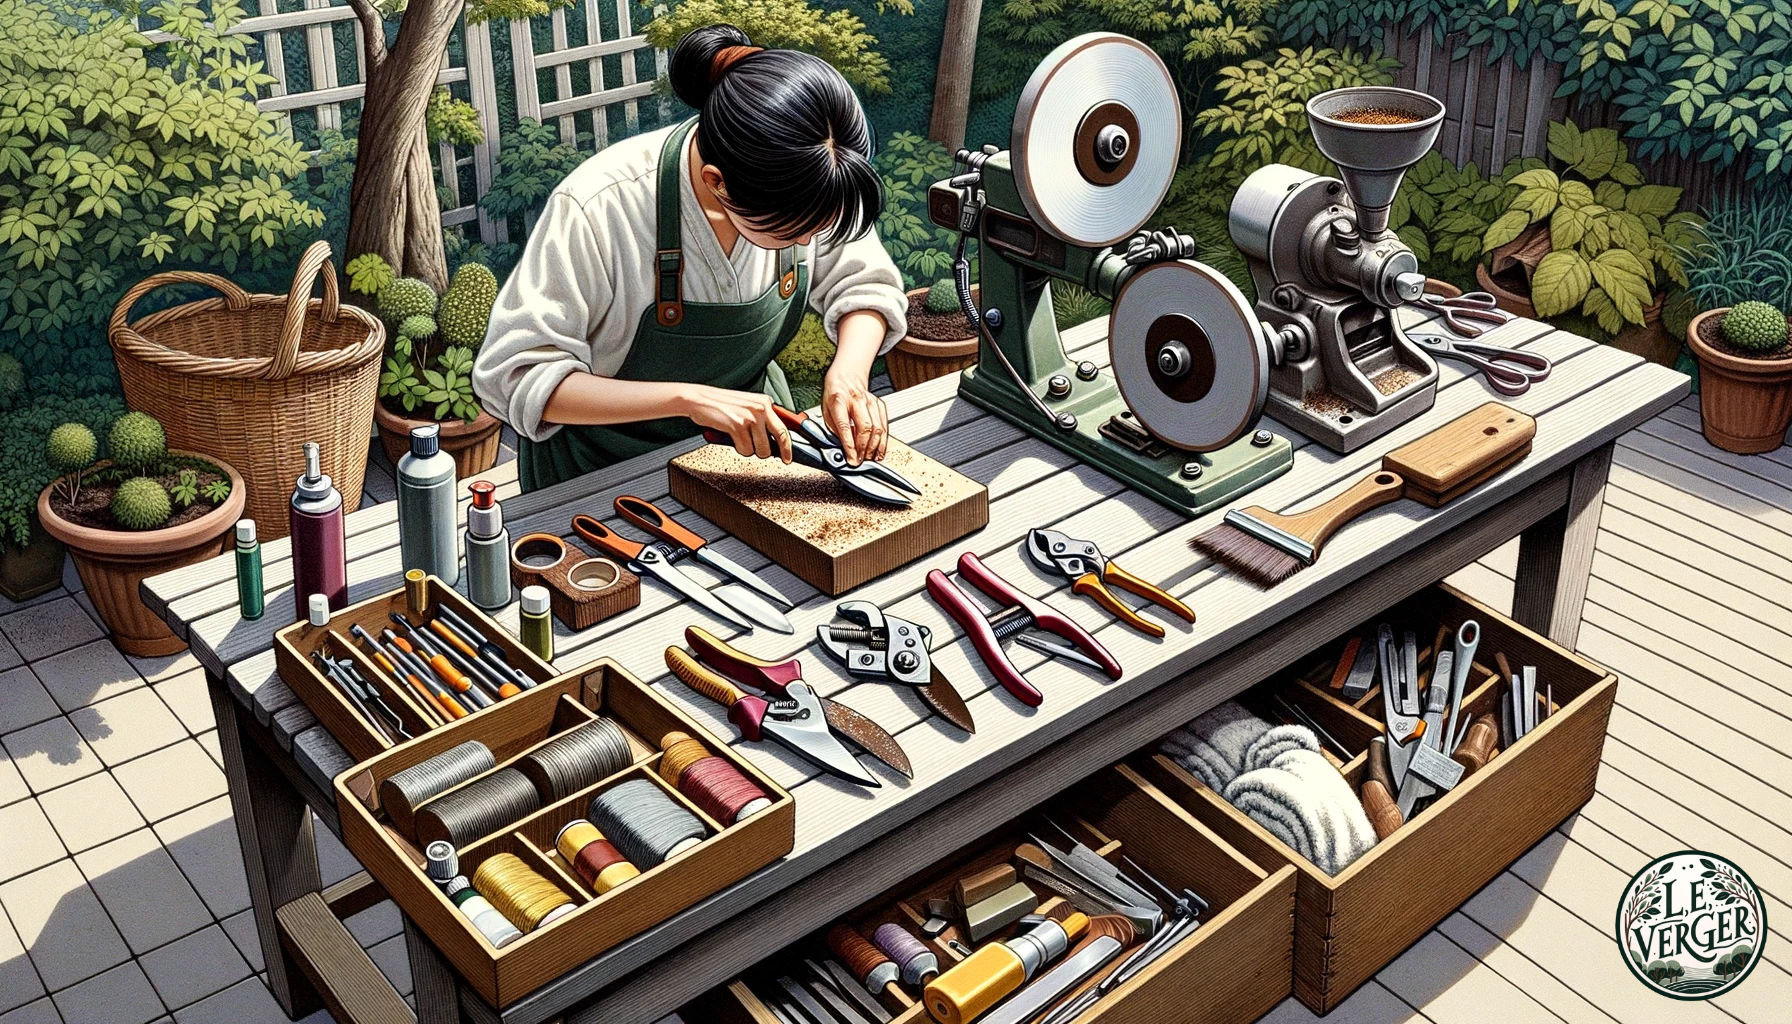 Illustration, wide aspect: An outdoor setting with a wooden bench. On it, various pruning tools are laid out. A gardener of Asian descent is meticulously cleaning rust off a pair of secateurs with a wire brush. Beside her, a sharpening station is set up with grinding wheels and files, where a gardener of Middle Eastern descent is honing the edge of a pruning saw. In the foreground, a toolbox is open, revealing maintenance supplies like oils, rags, and replacement blades.